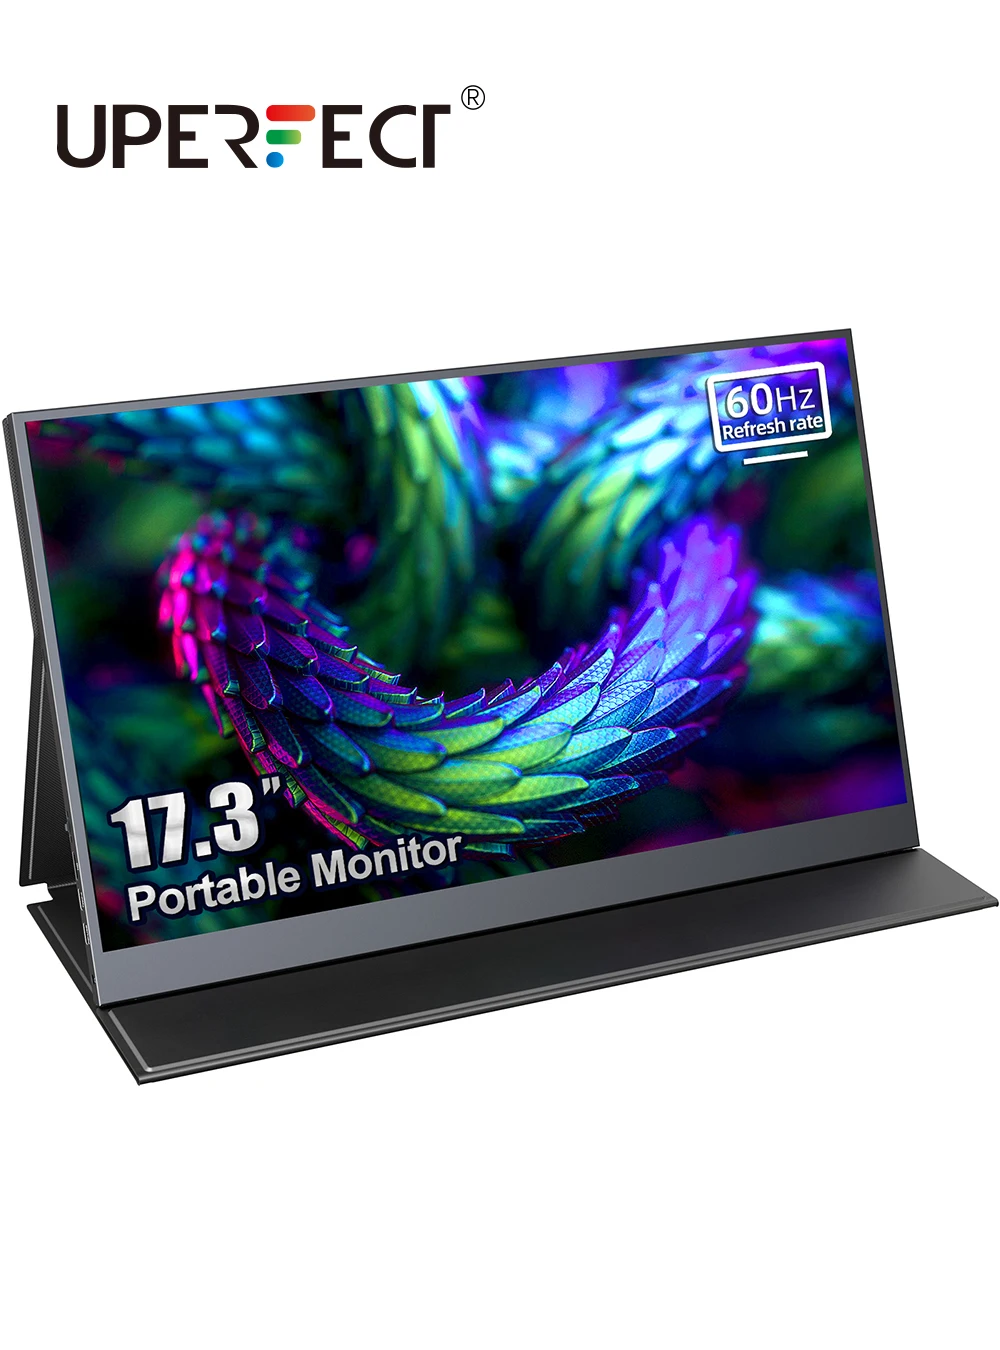 UPERFECT 17.3-Inch Game Display C-Type Portable Computer Monitor LCD Second Screen Built-In Dual Speakers For Tablet Laptop PC